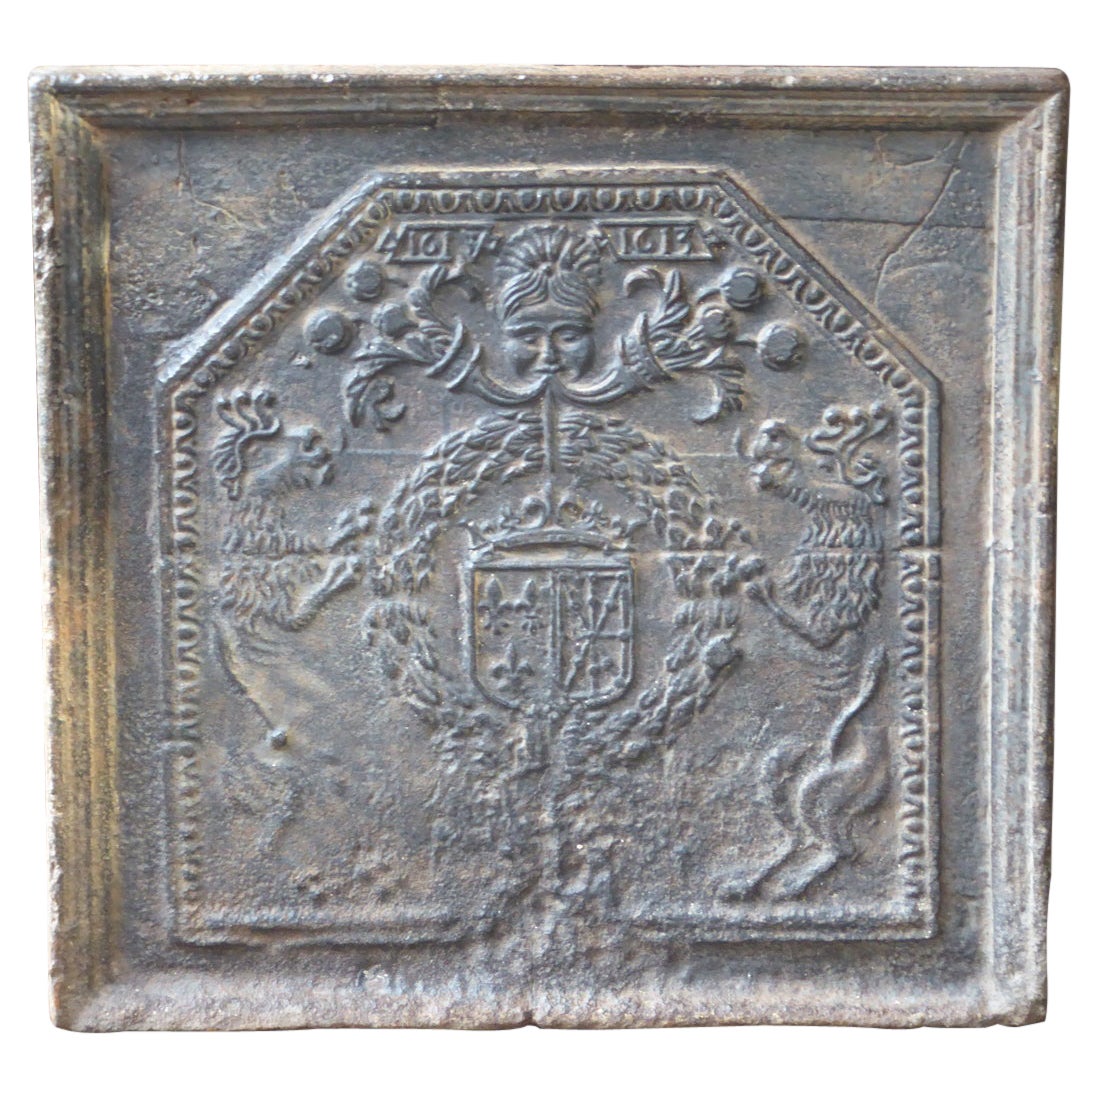 Antique French 'Arms of France and Navarre' Fireback / Backsplash, 17th Century